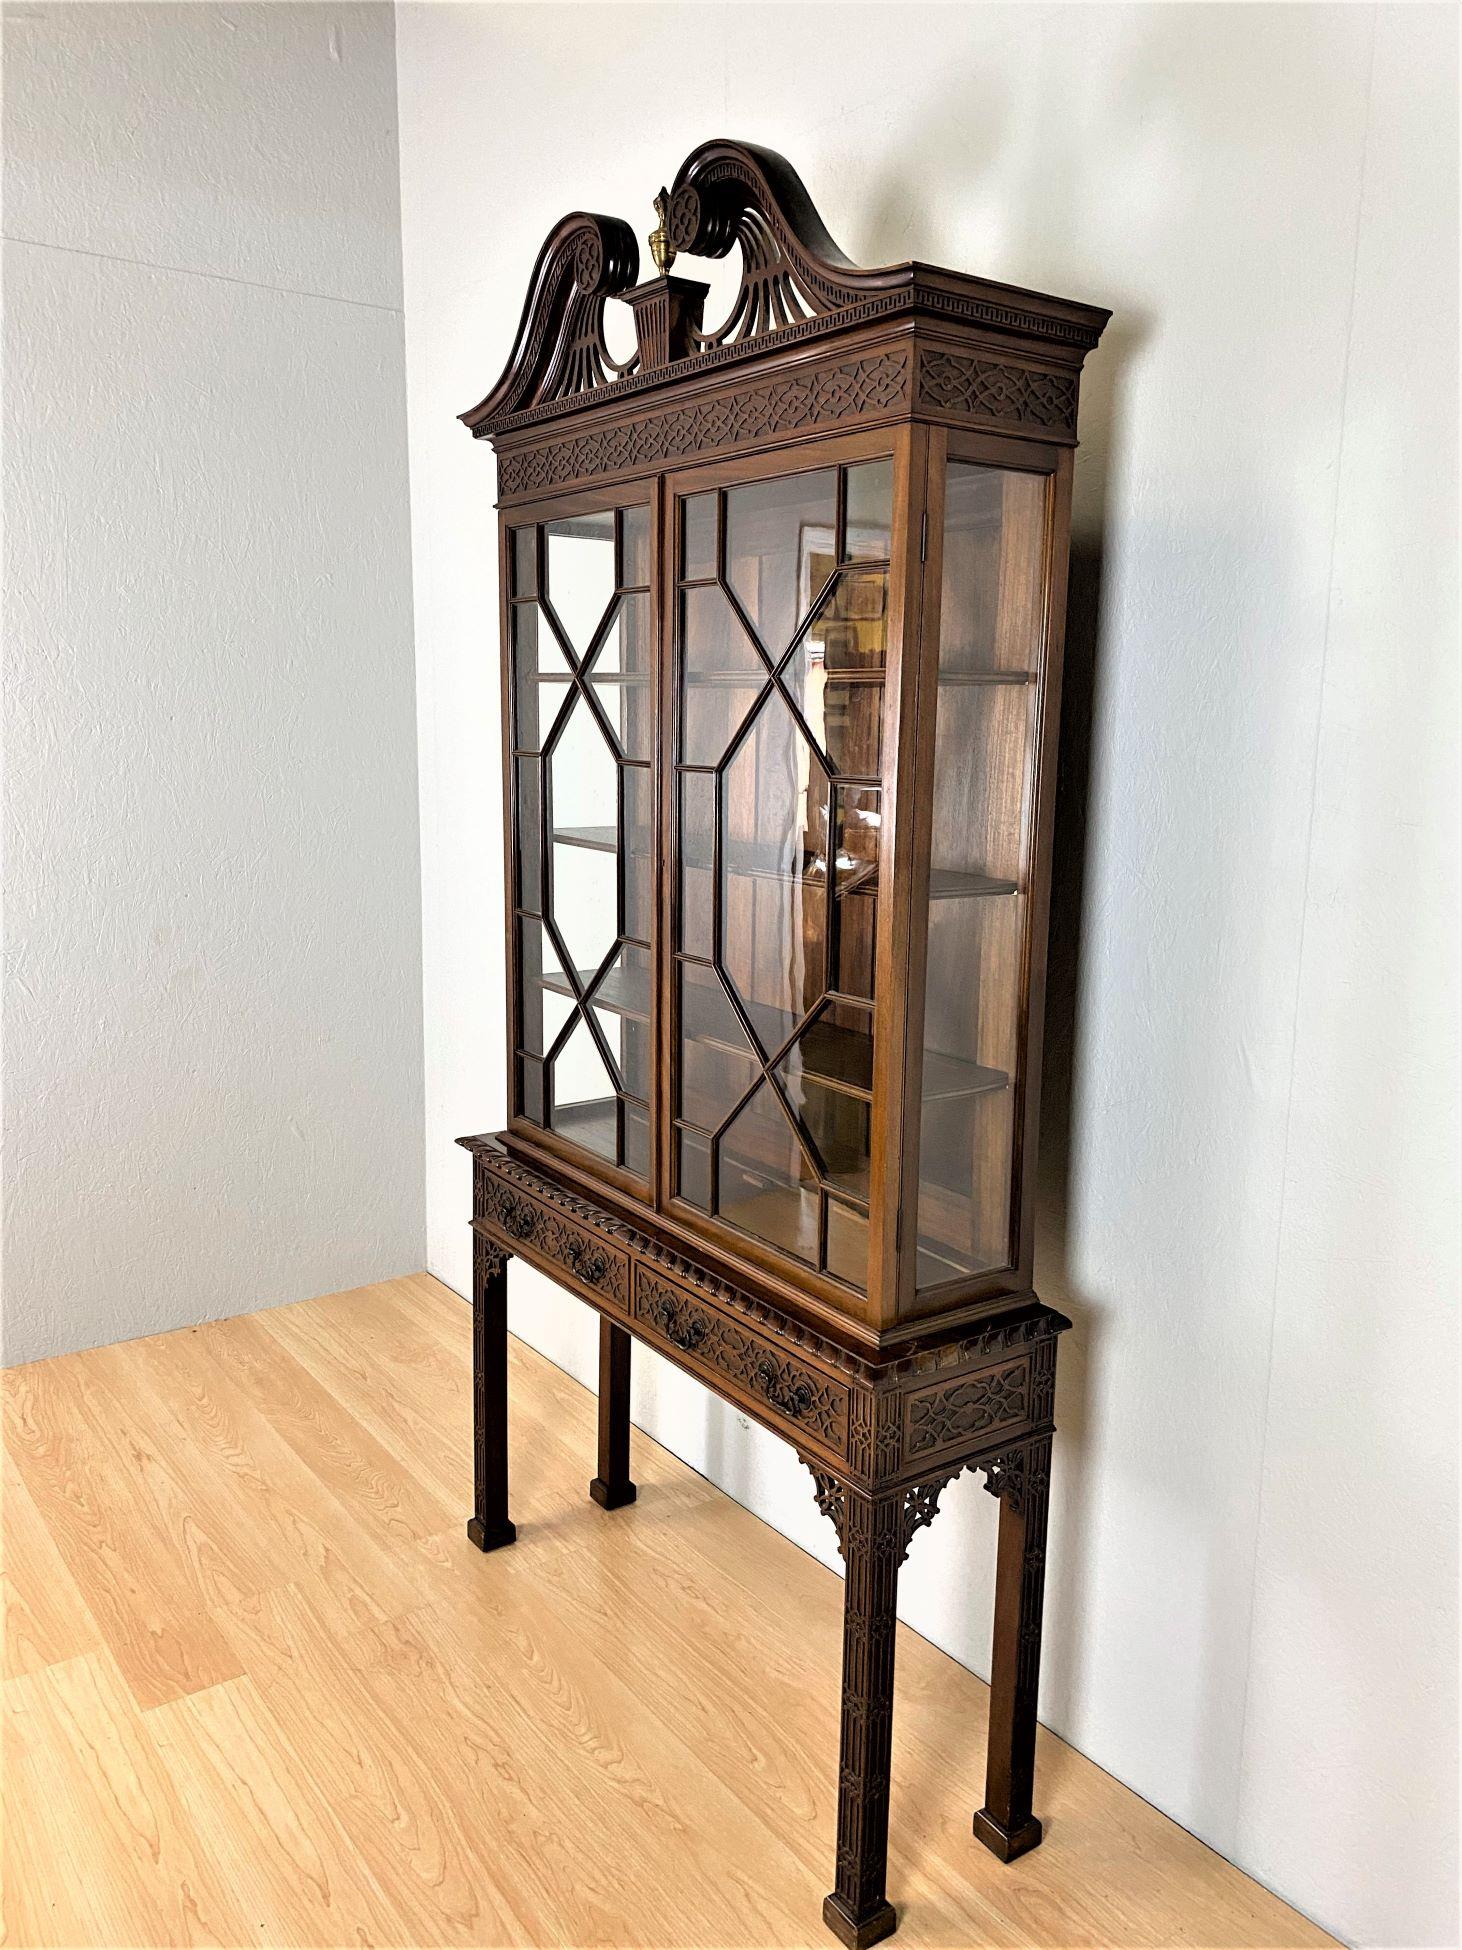 A fine late 19th century mahogany display cabinet in the Chippendale style.
The swan-neck pierced broken arch pediment with a central brass finial, sits above a pair of astragal glazed doors with a pair of blind fretwork fronted drawers with iron